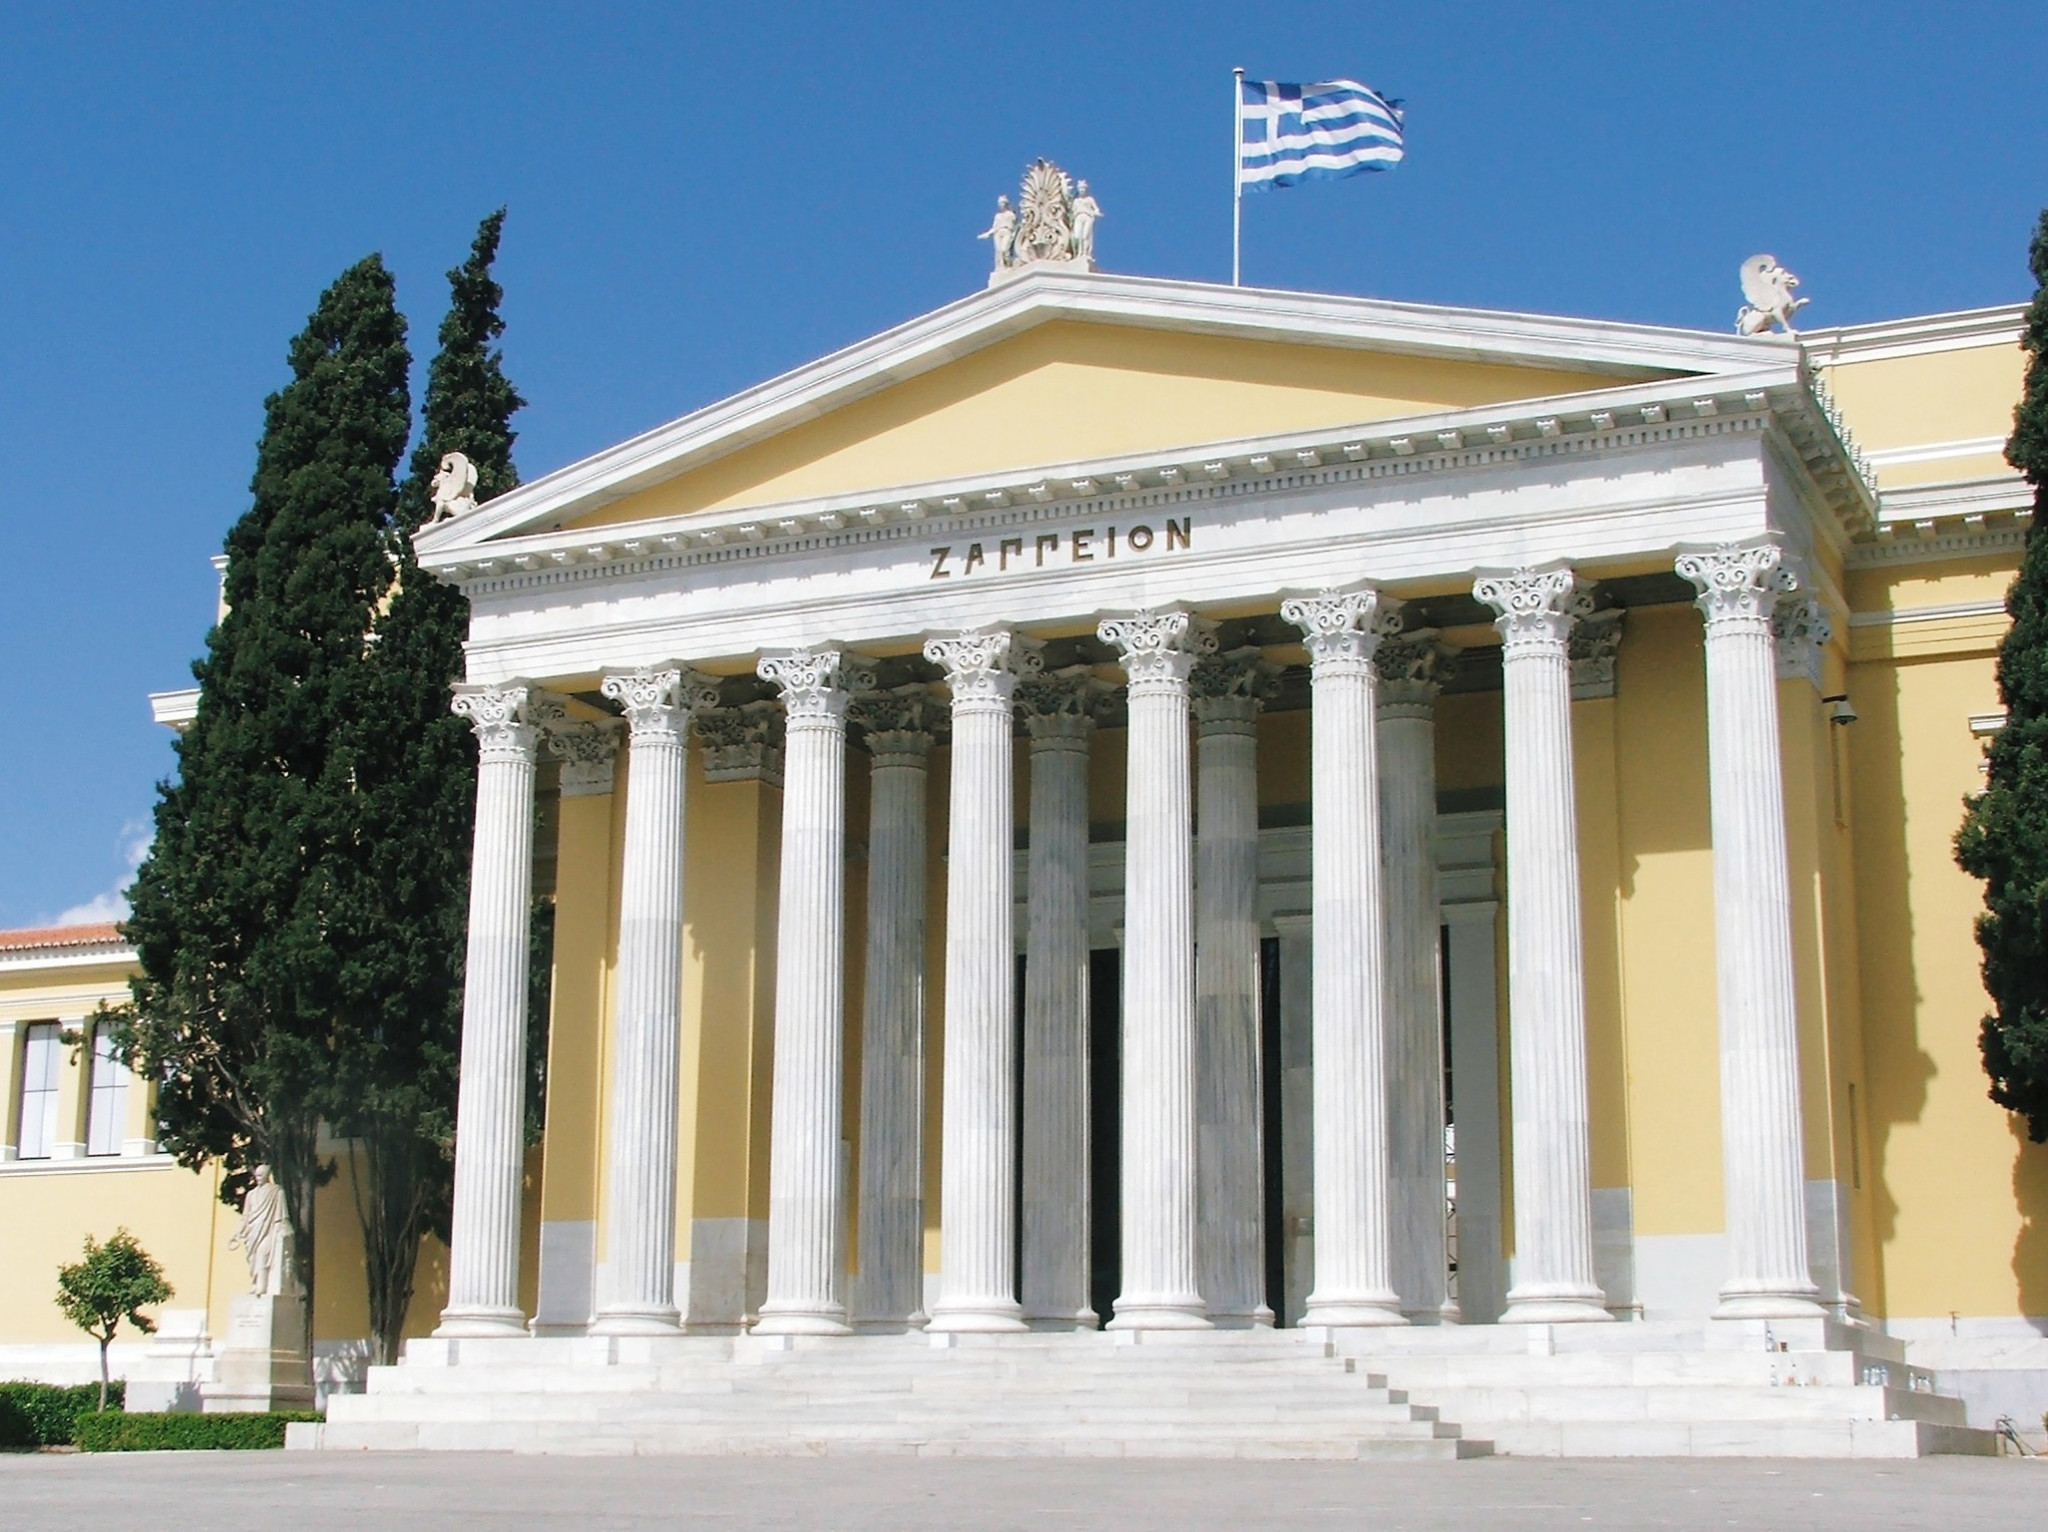 The Zappeion was used during the 1896 Olympic Games in Athens ©Philip Barker